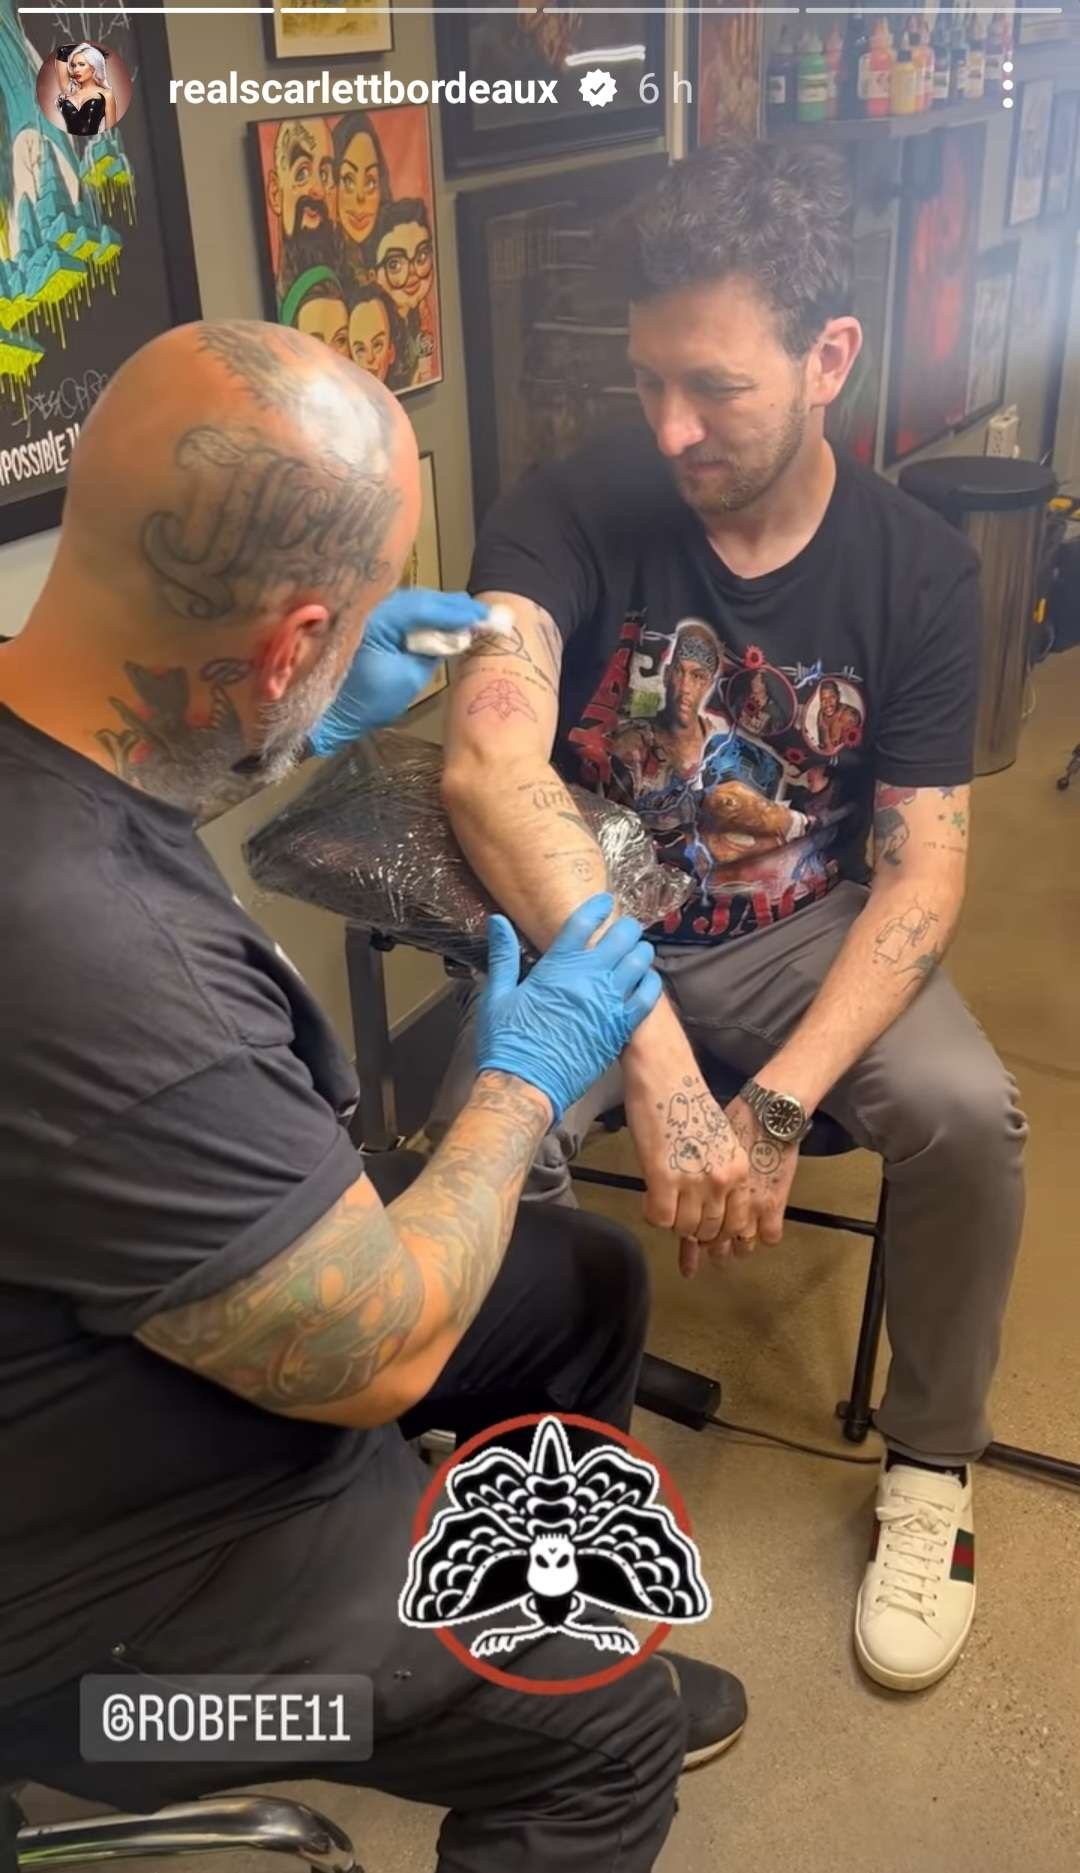 Braun Strowman Takes His Love for Bray Wyatt to the Next Level by Joining  14 Other WWE Personalities in Getting Permanent Tattoos of the Late  Superstar - EssentiallySports